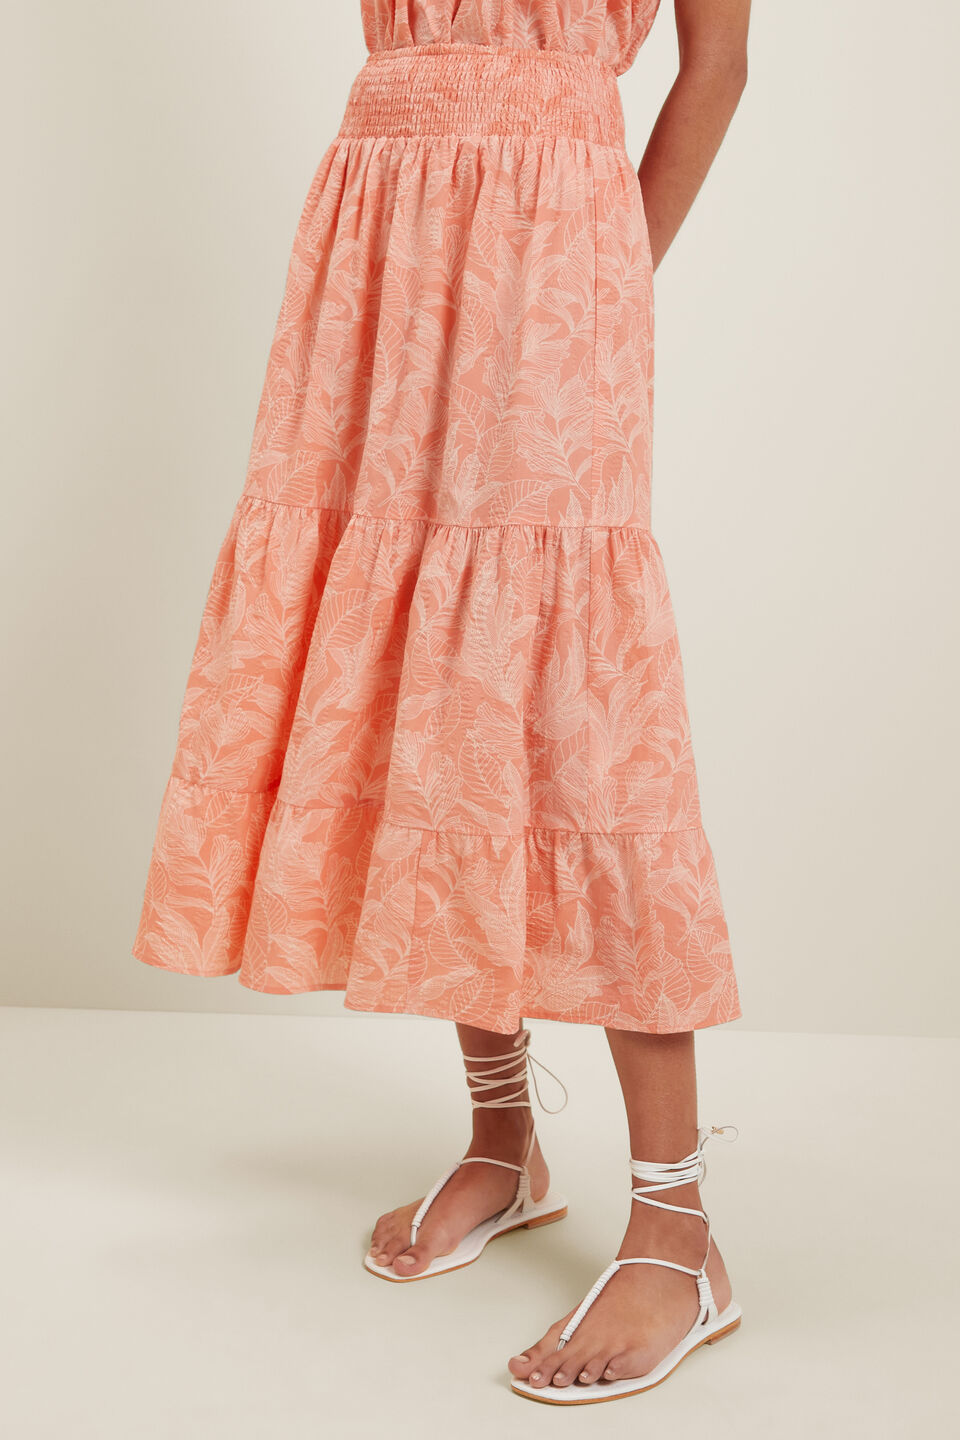 Textured Tiered Skirt  Coral Rose Floral